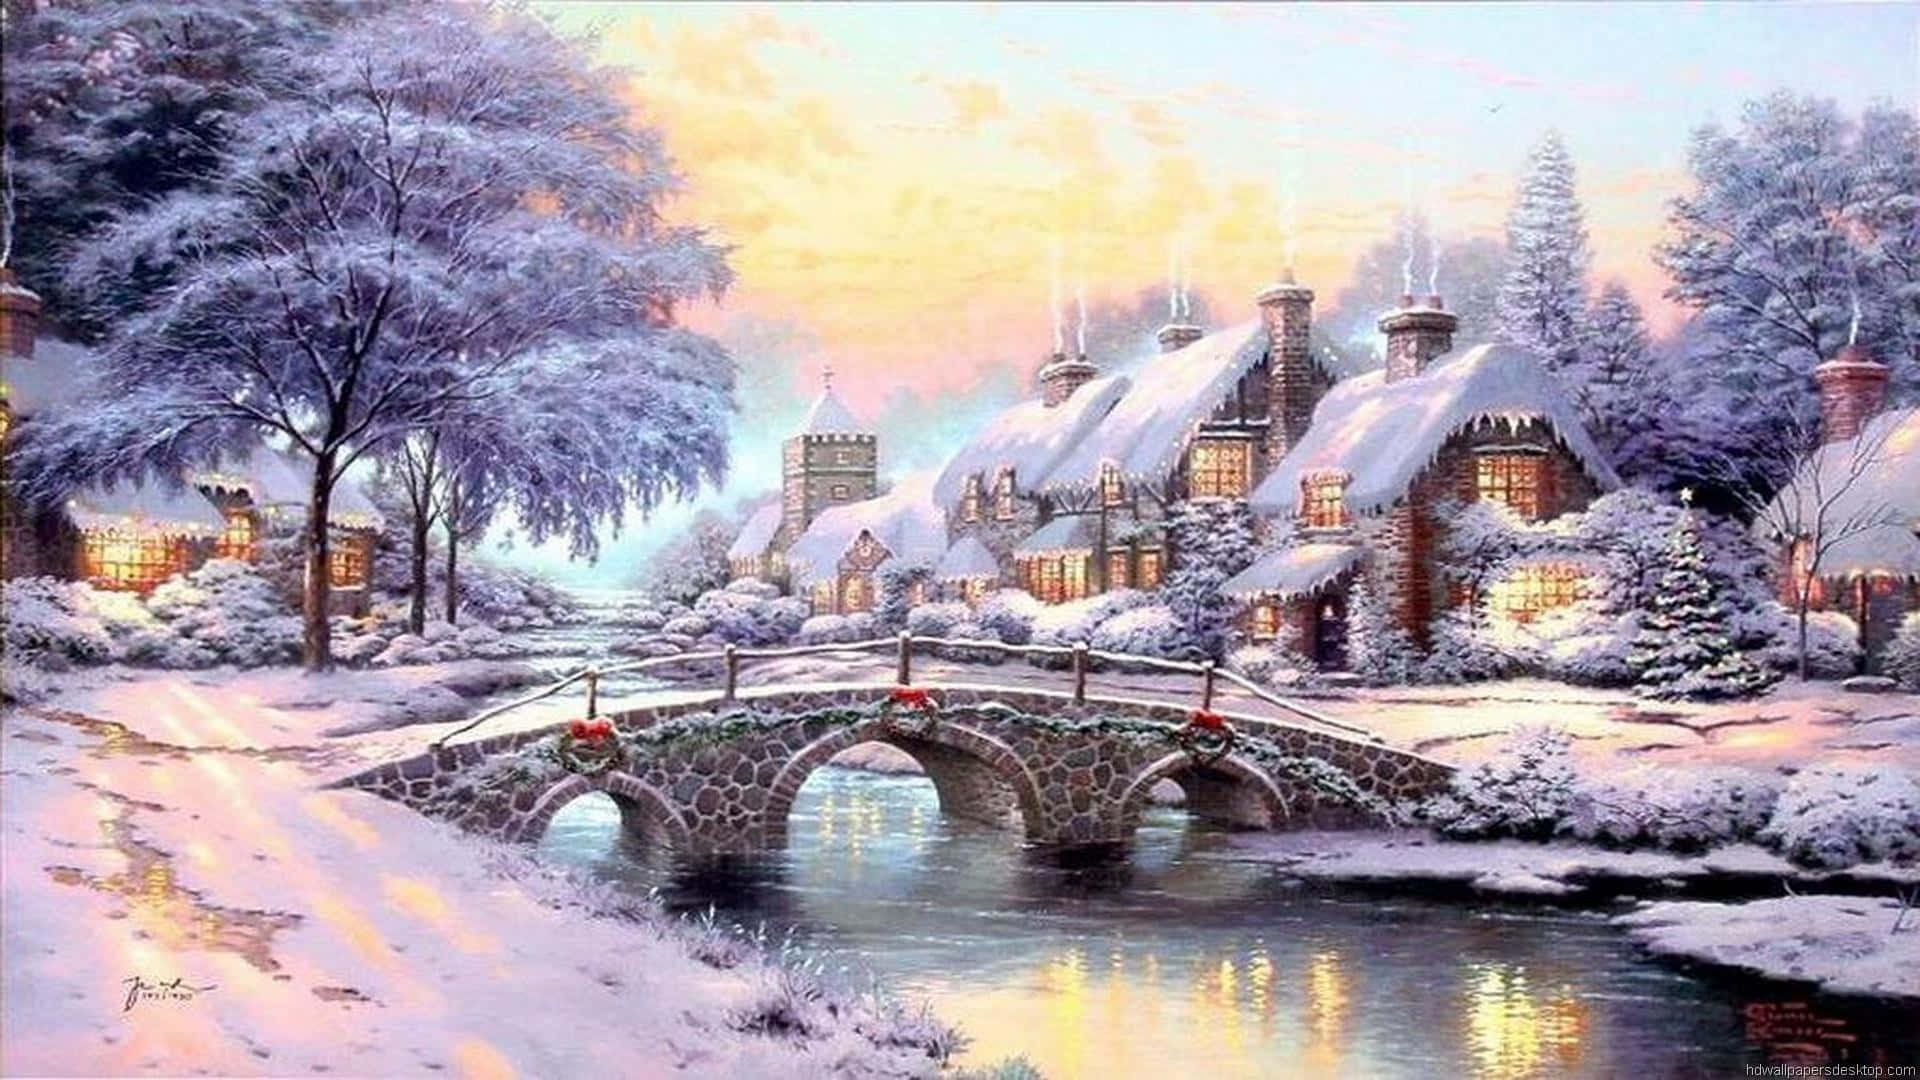 A Painting Of A Snowy Village With A Bridge Wallpaper